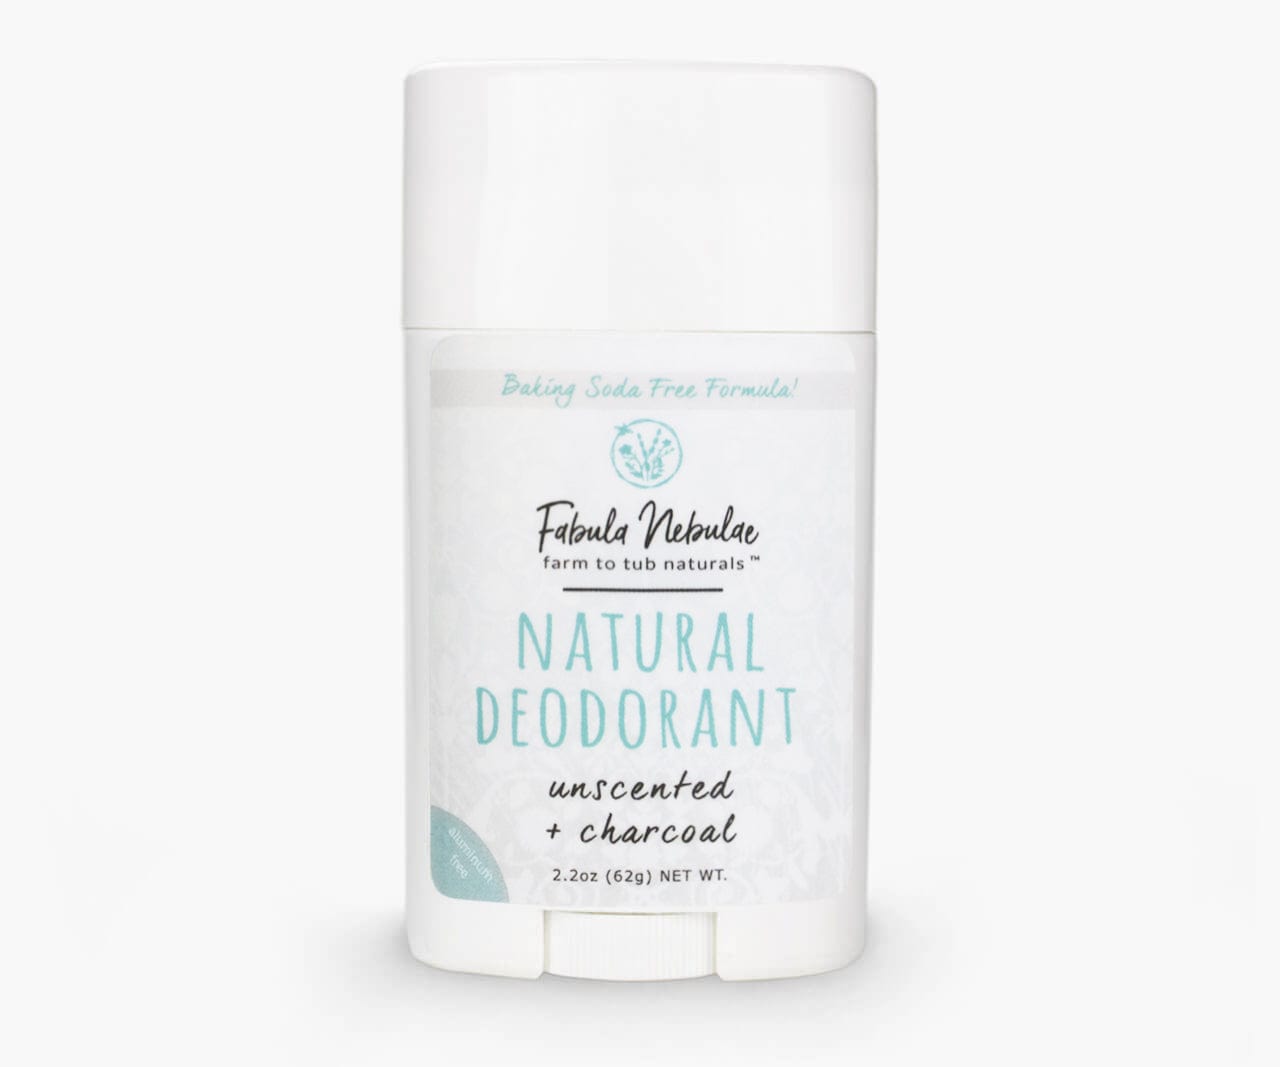 Natural Baking Soda Free Deodorant (Unscented + Charcoal)